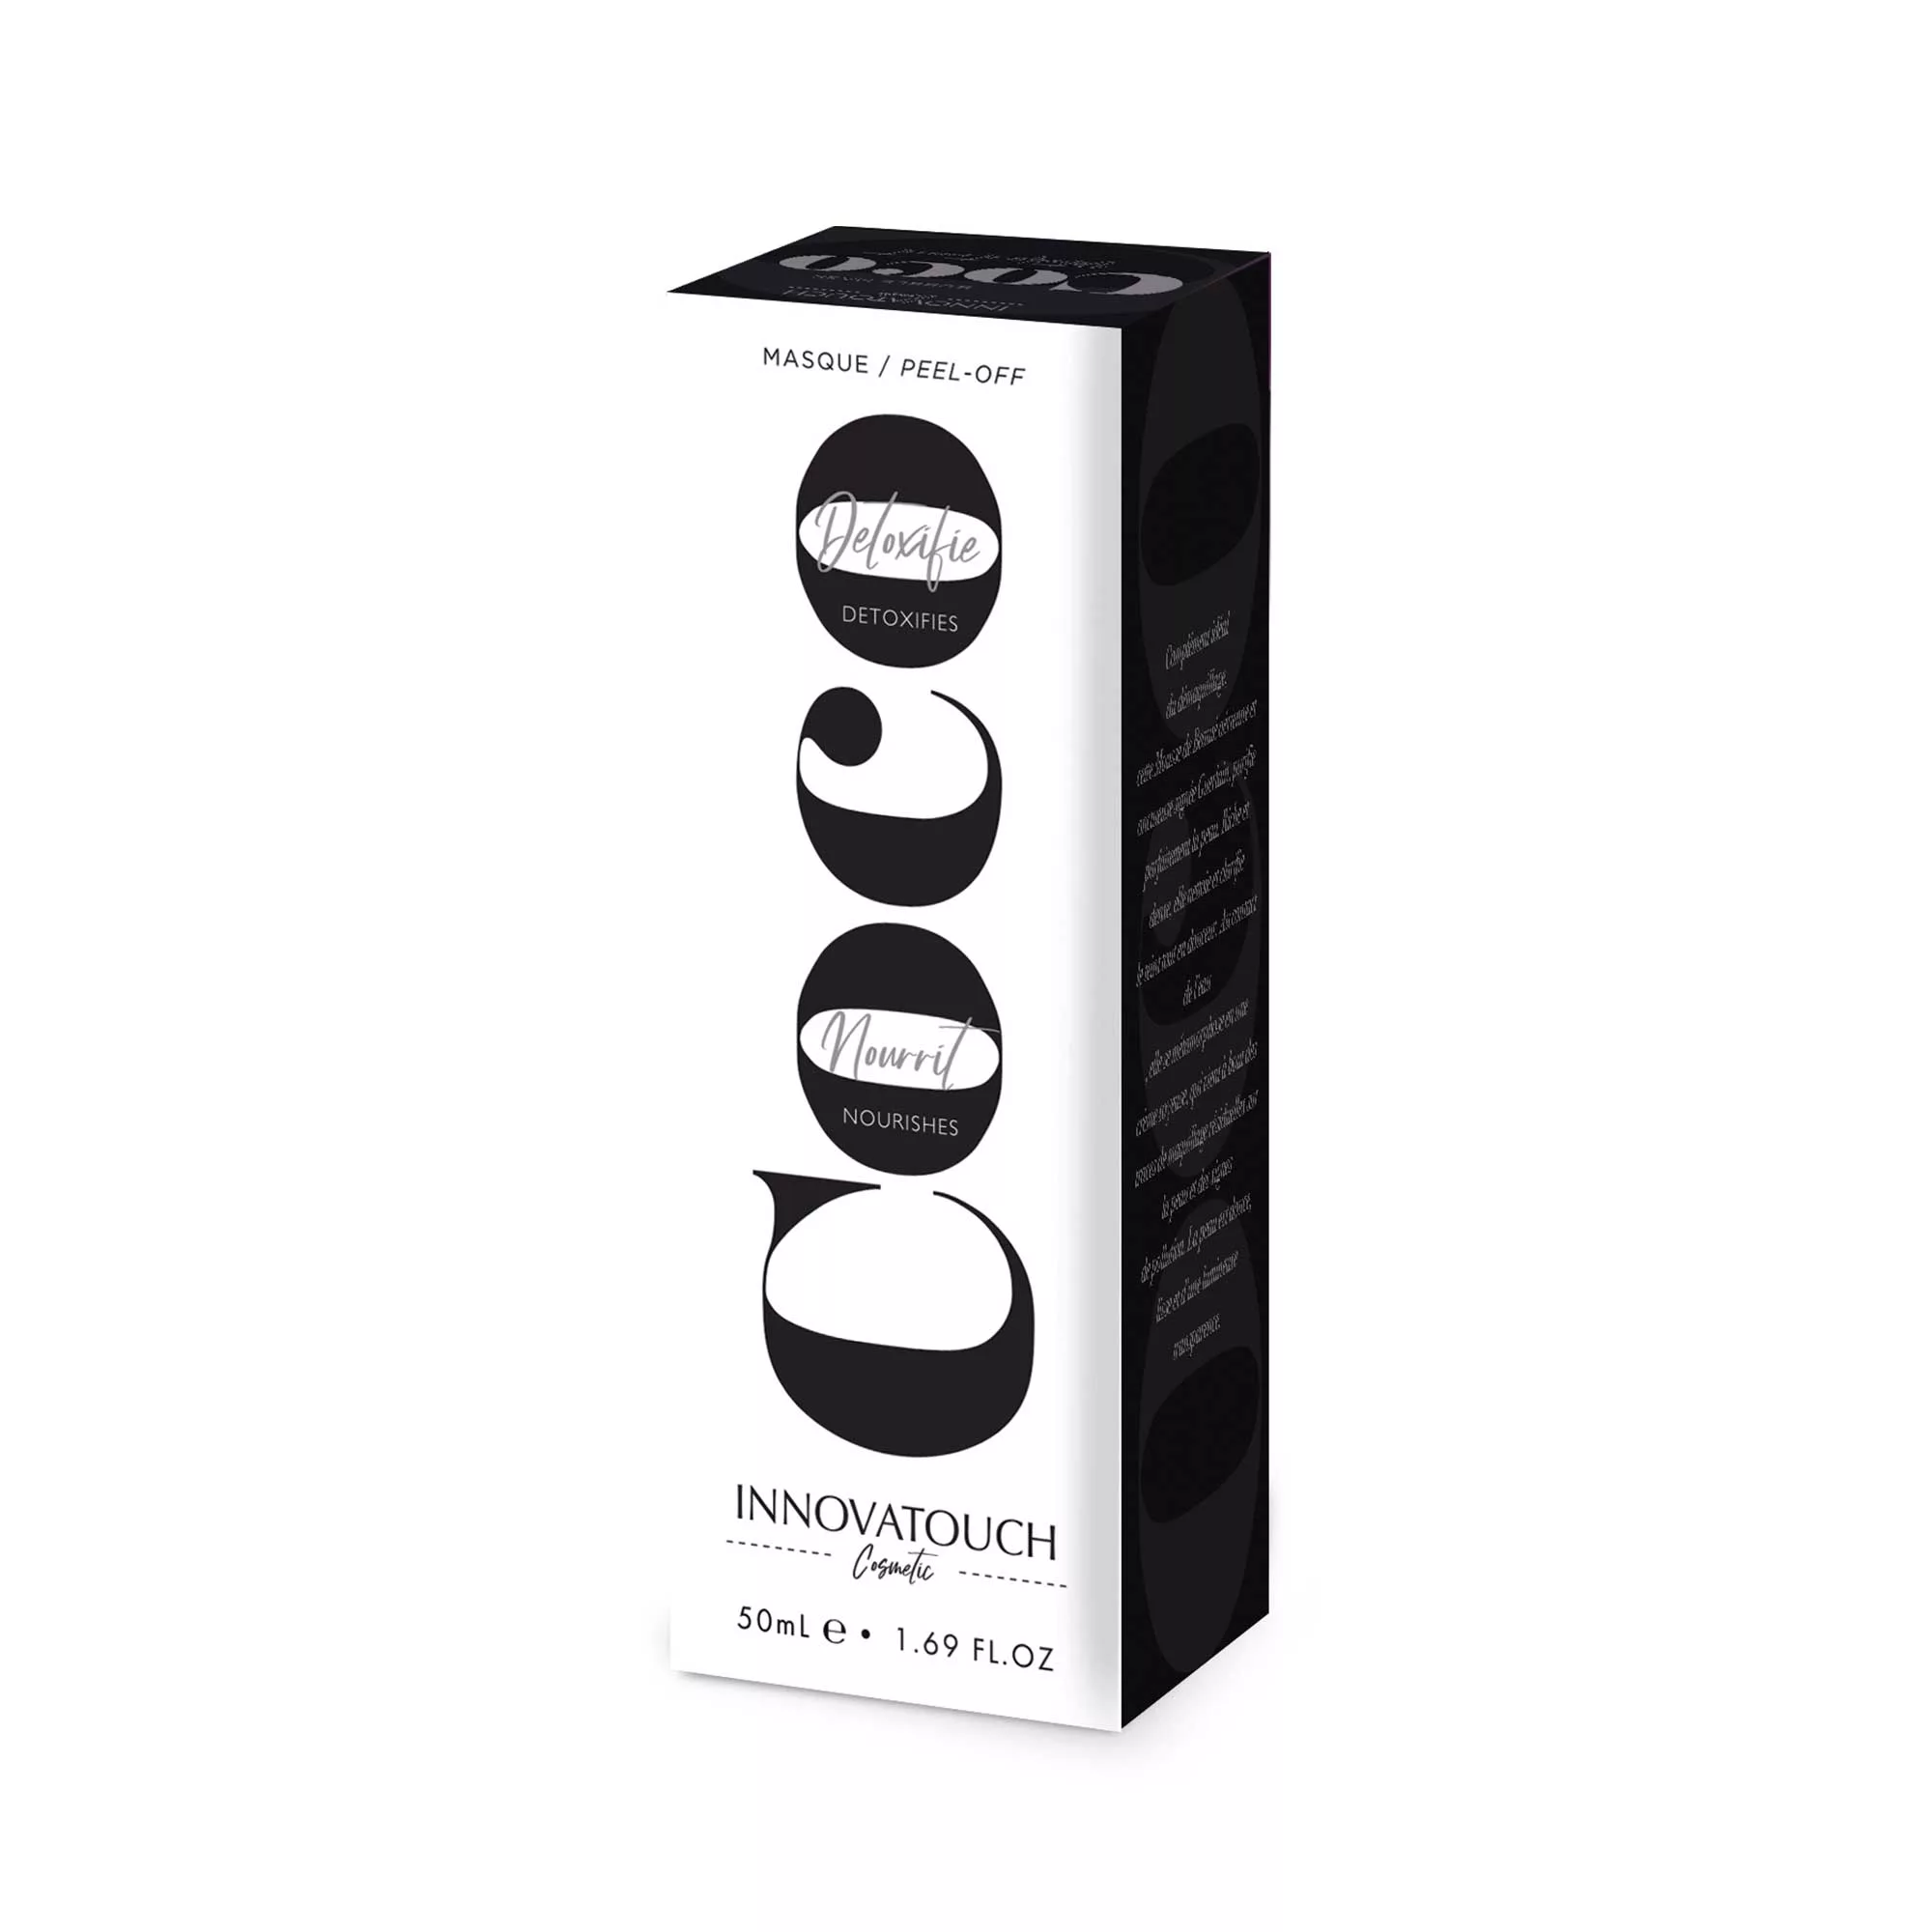 COCO-masque-peel-off-1-innovatouch-cosmetic